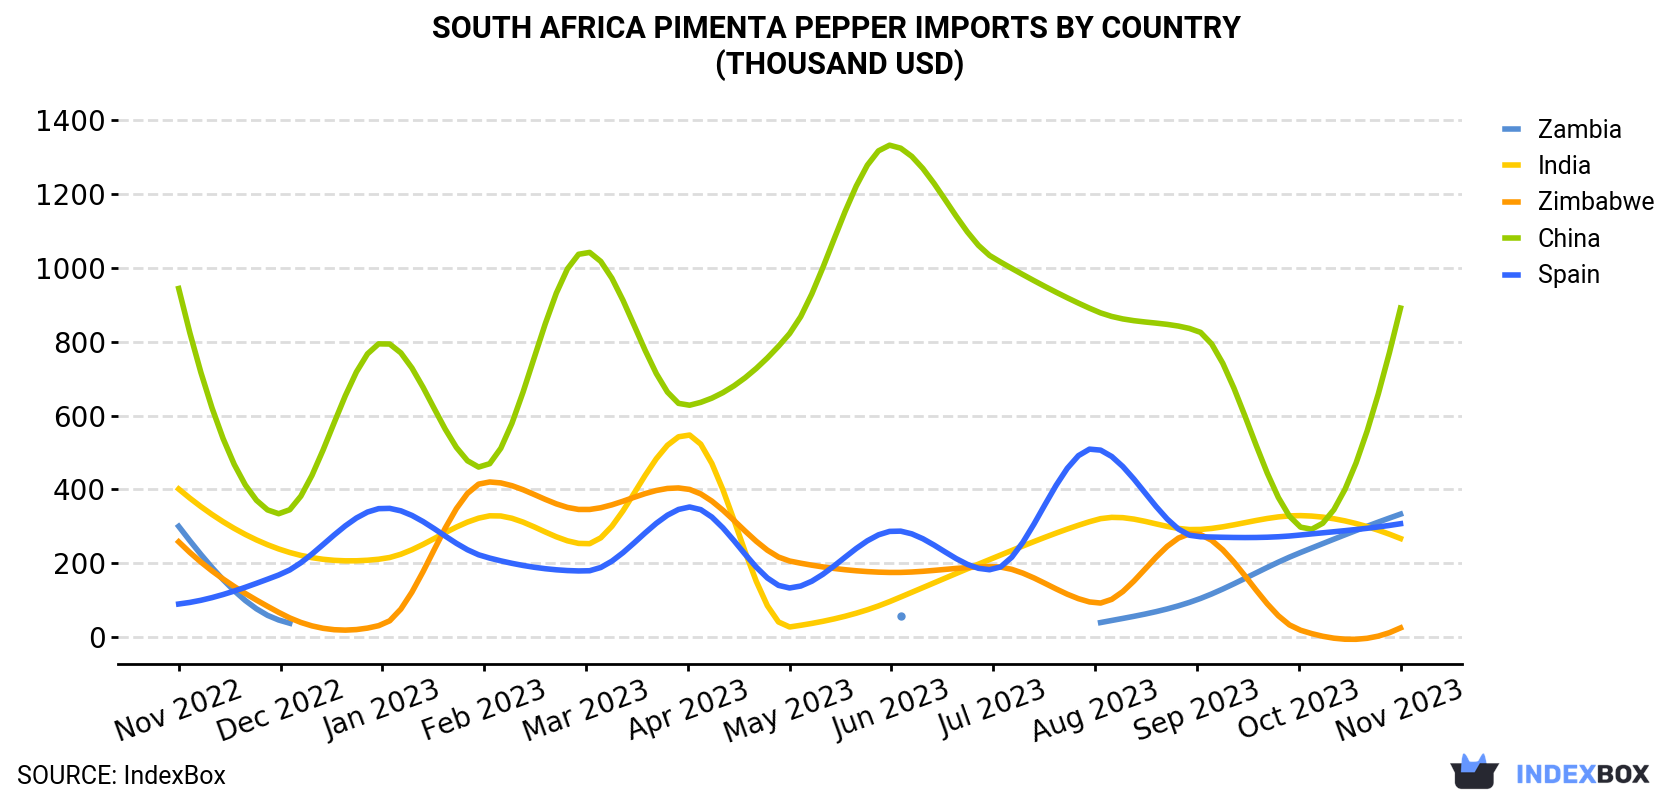 South Africa Pimenta Pepper Imports By Country (Thousand USD)